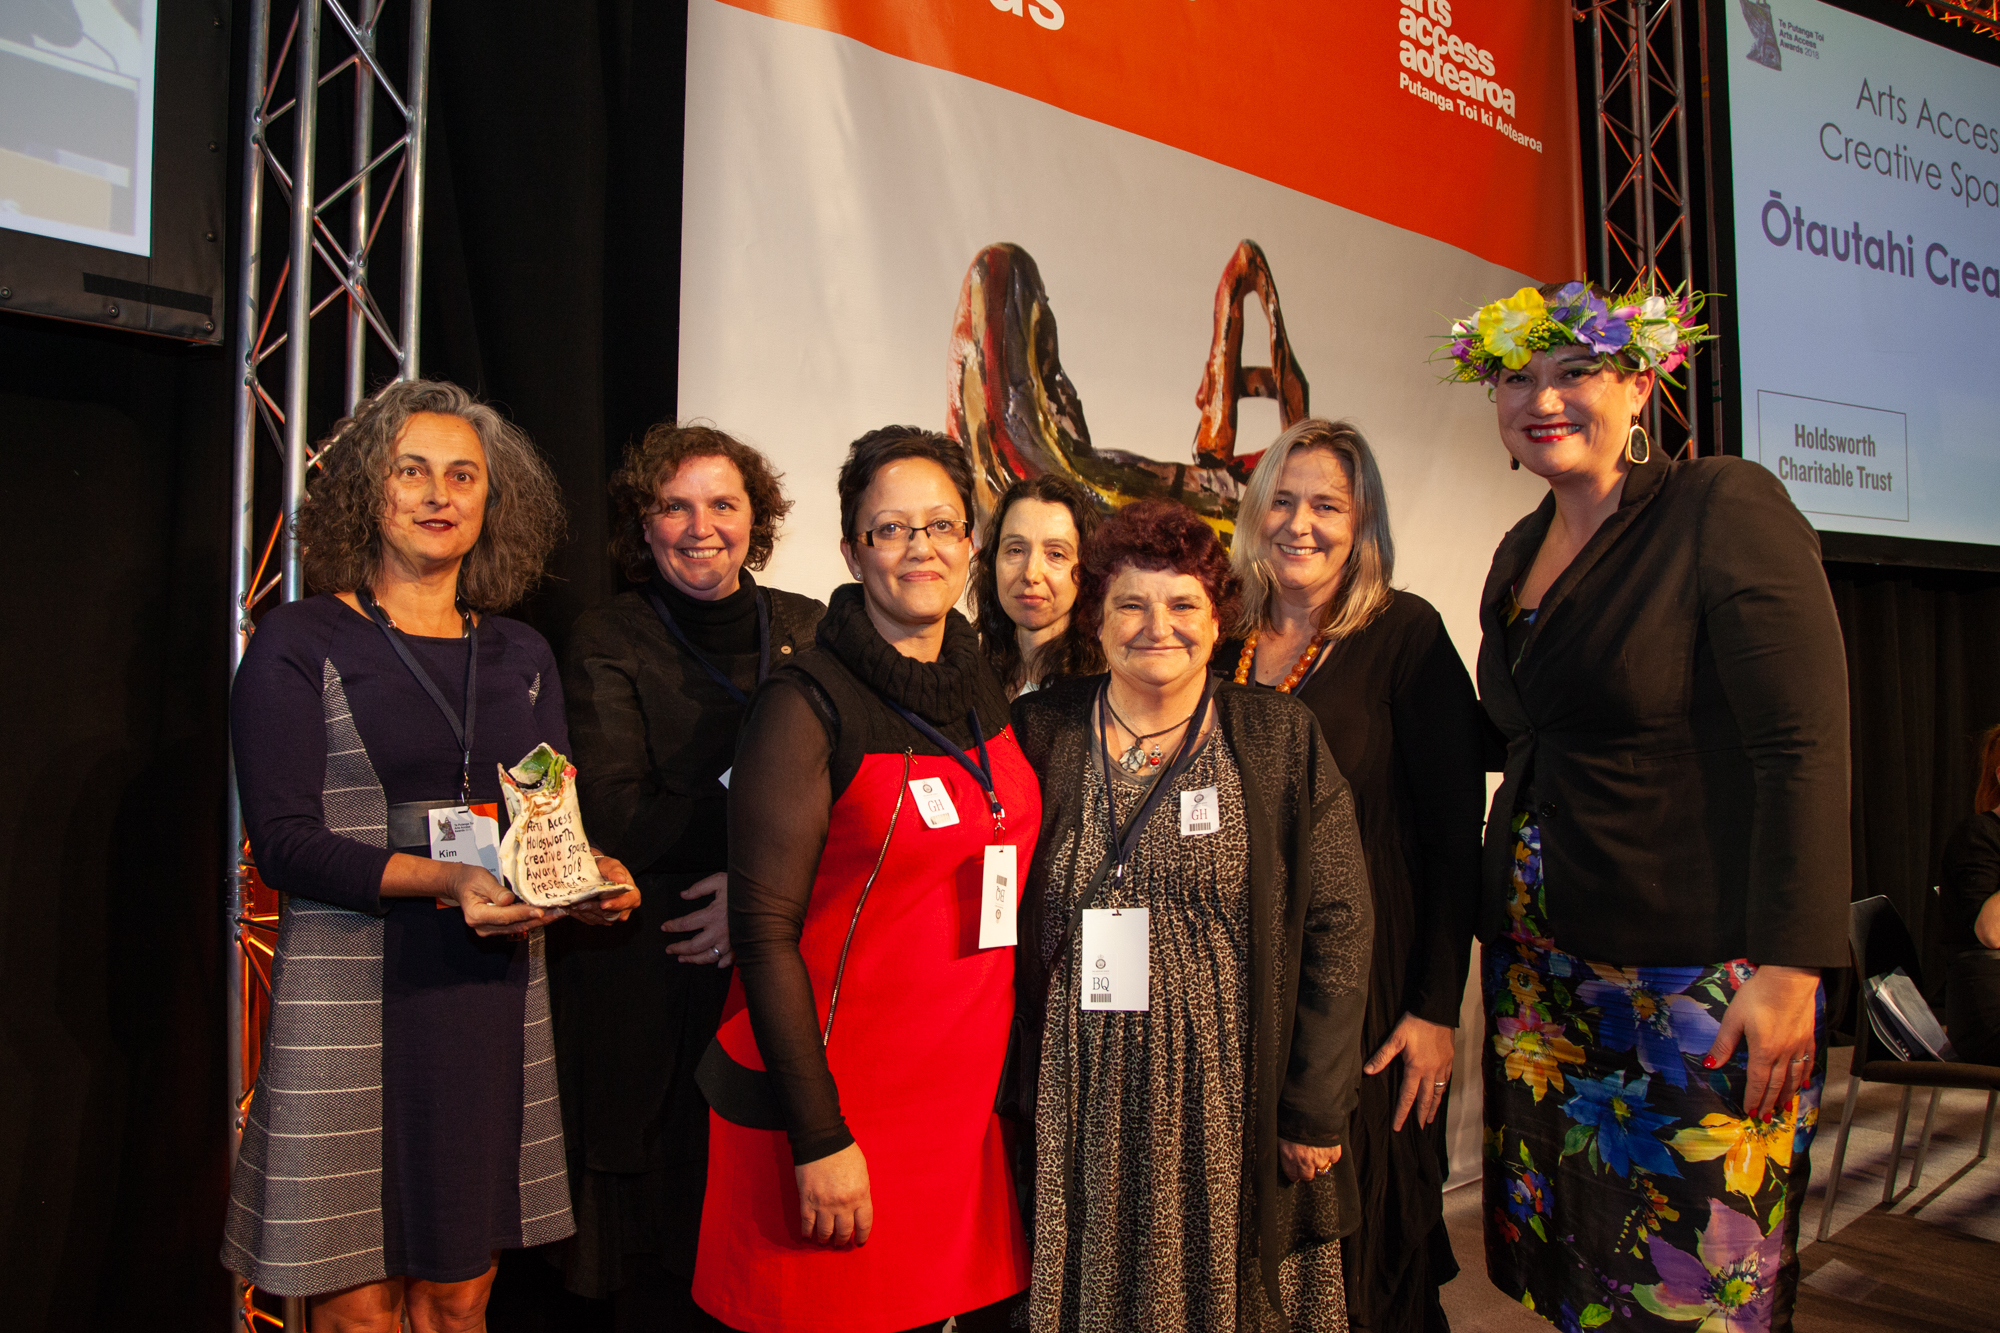 Minister Sepuloni presents the Arts Access Holdsworth Creative Spaces Award 2018 to Ōtautahi Creative Spaces 